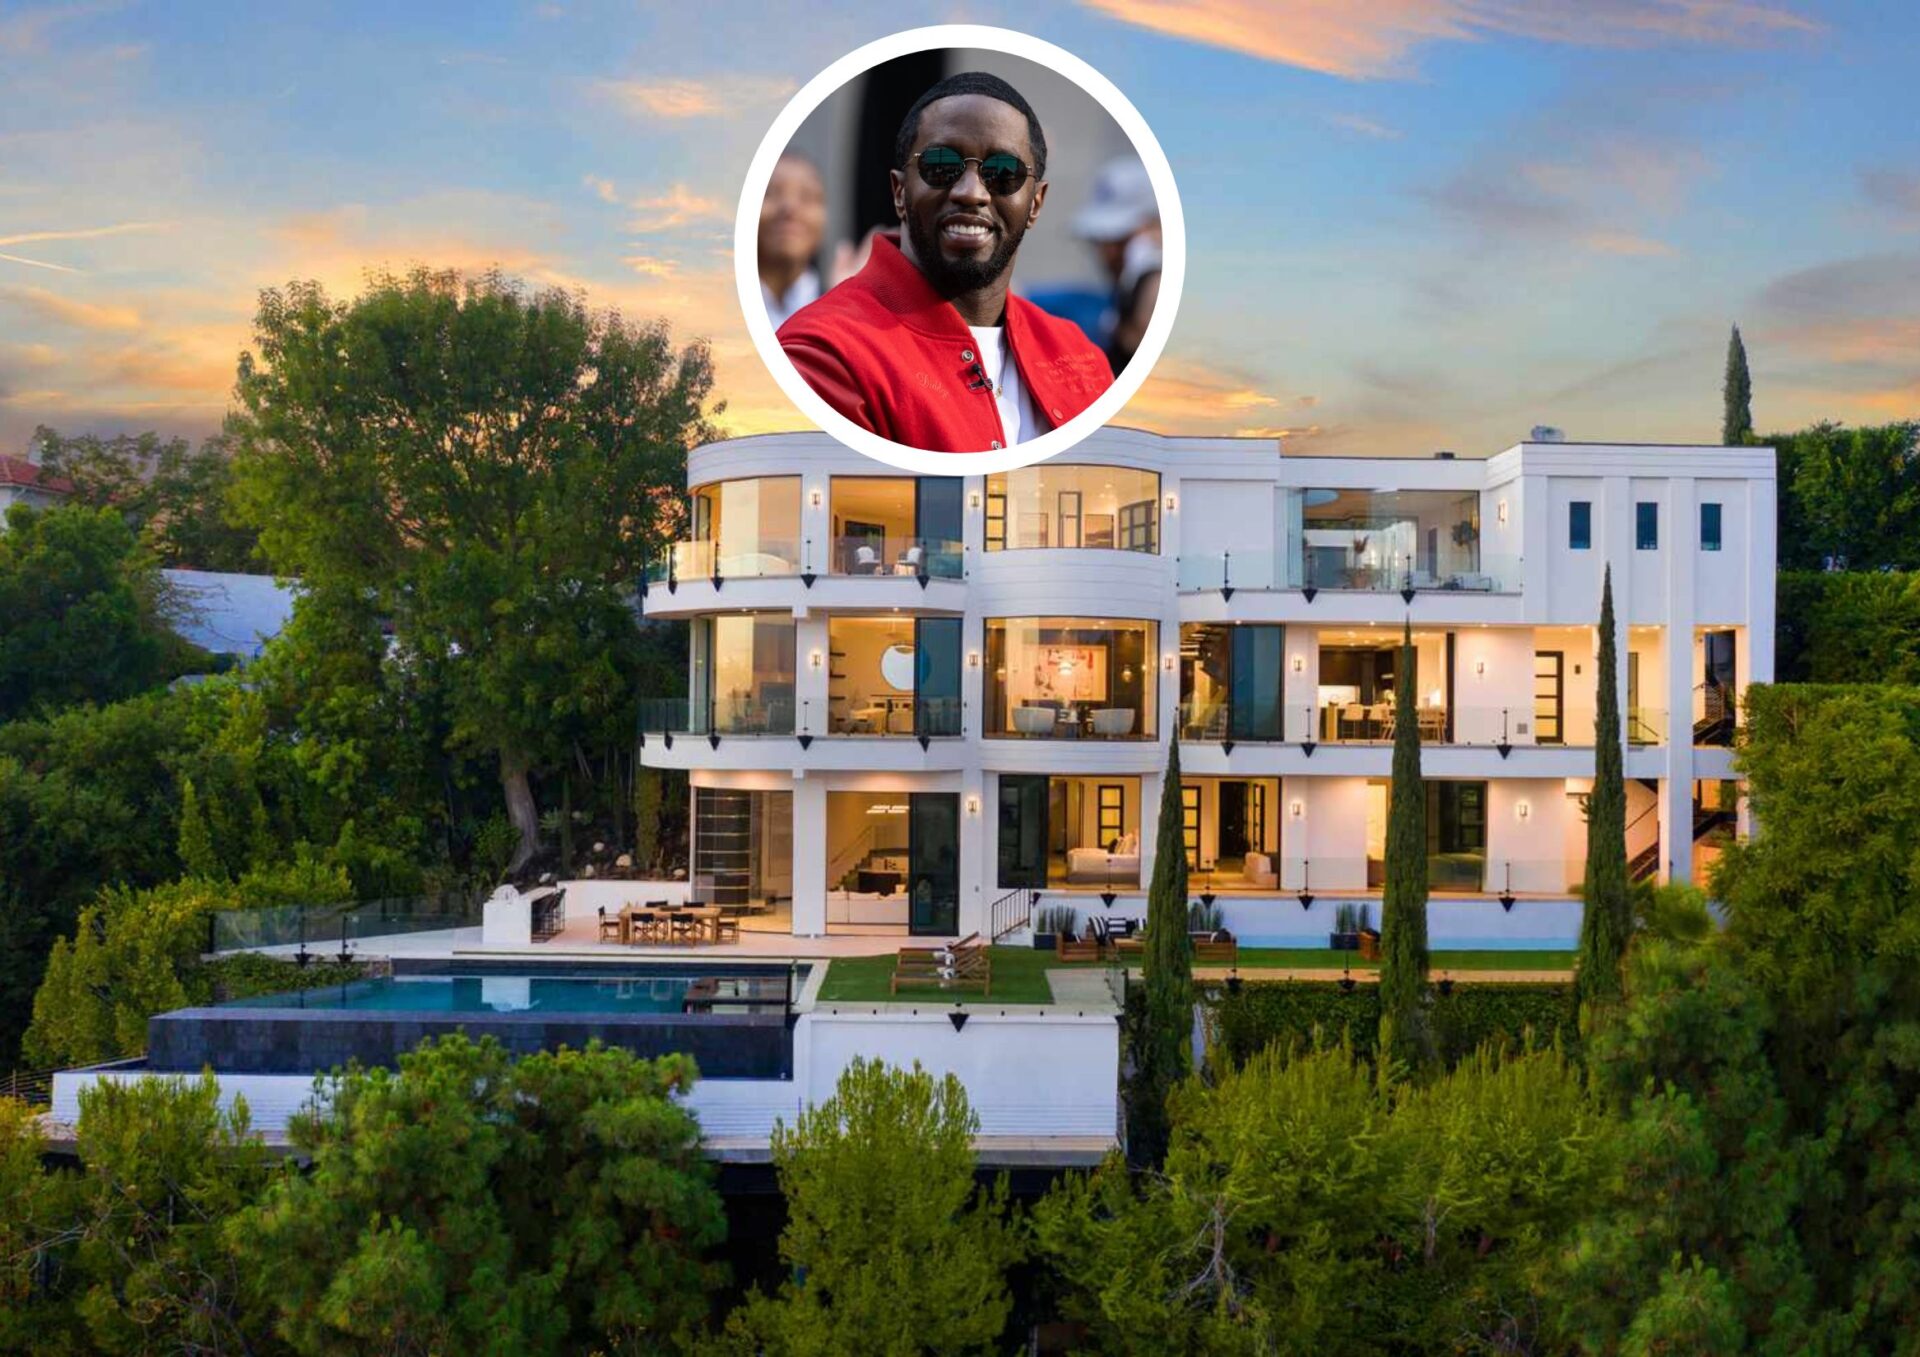 Main Image of Diddy's Estate